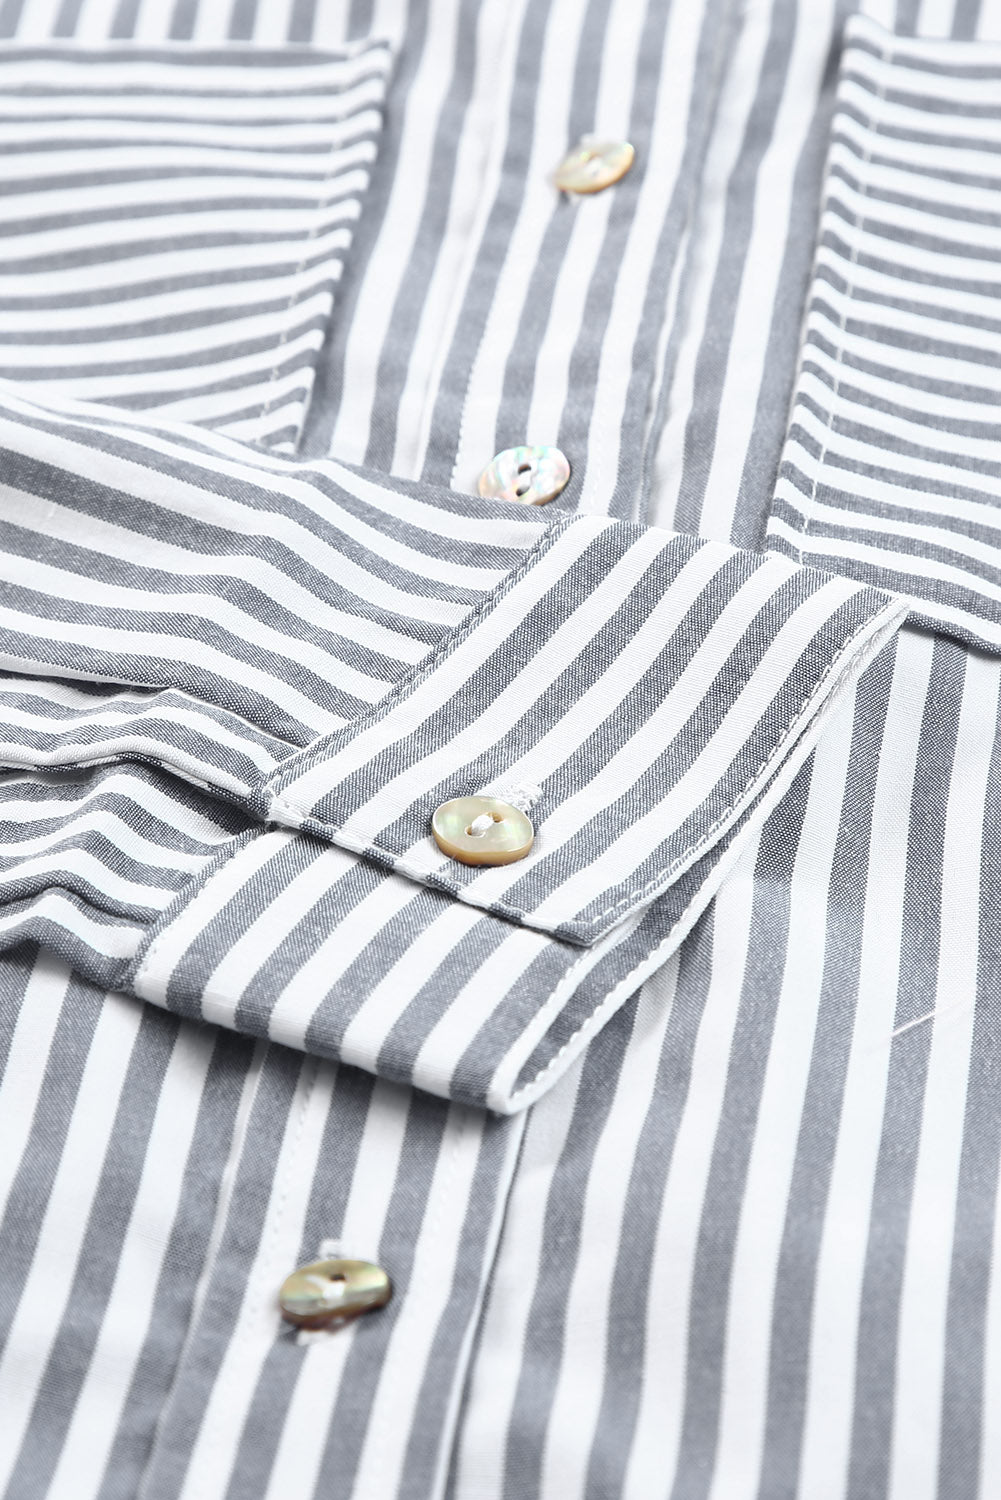 Striped Pocketed Buttons Long Sleeve Shirt